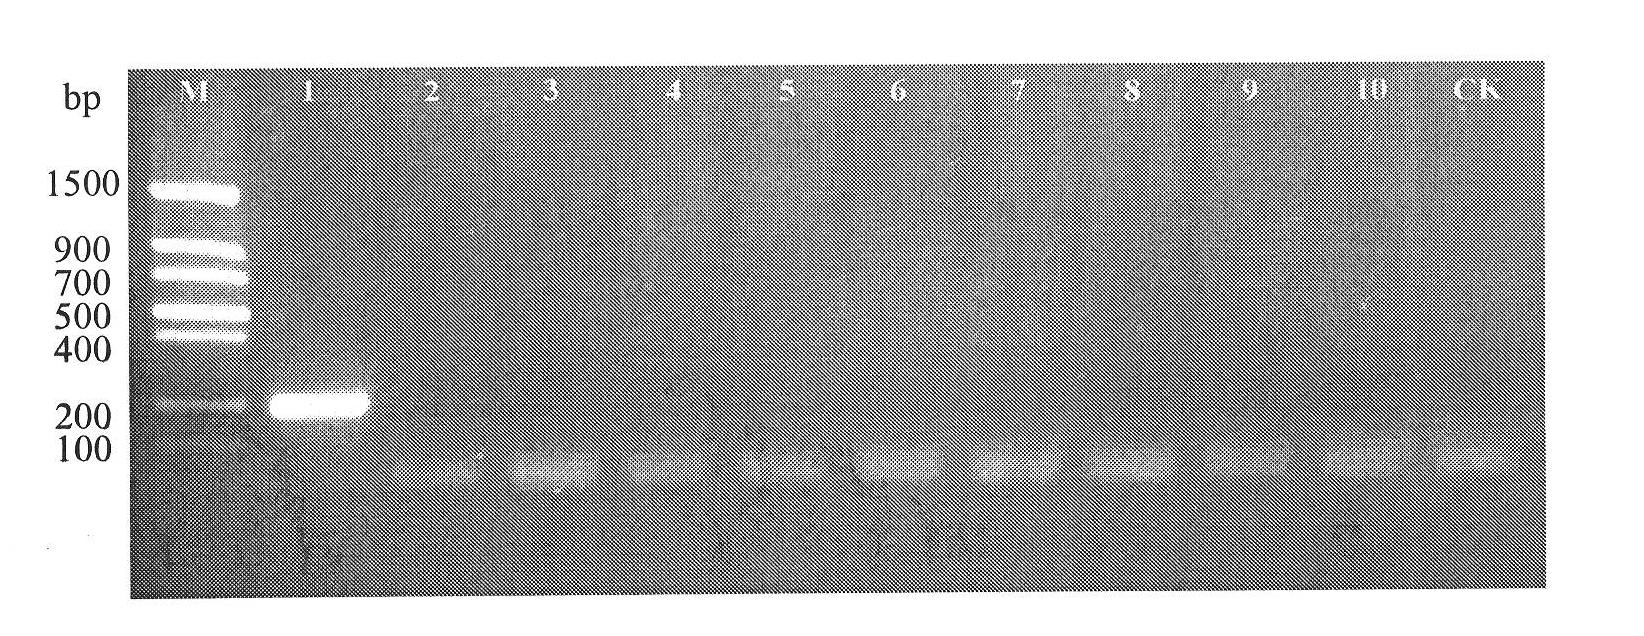 Primer sequence for identifying lactobacillus brevis and application thereof